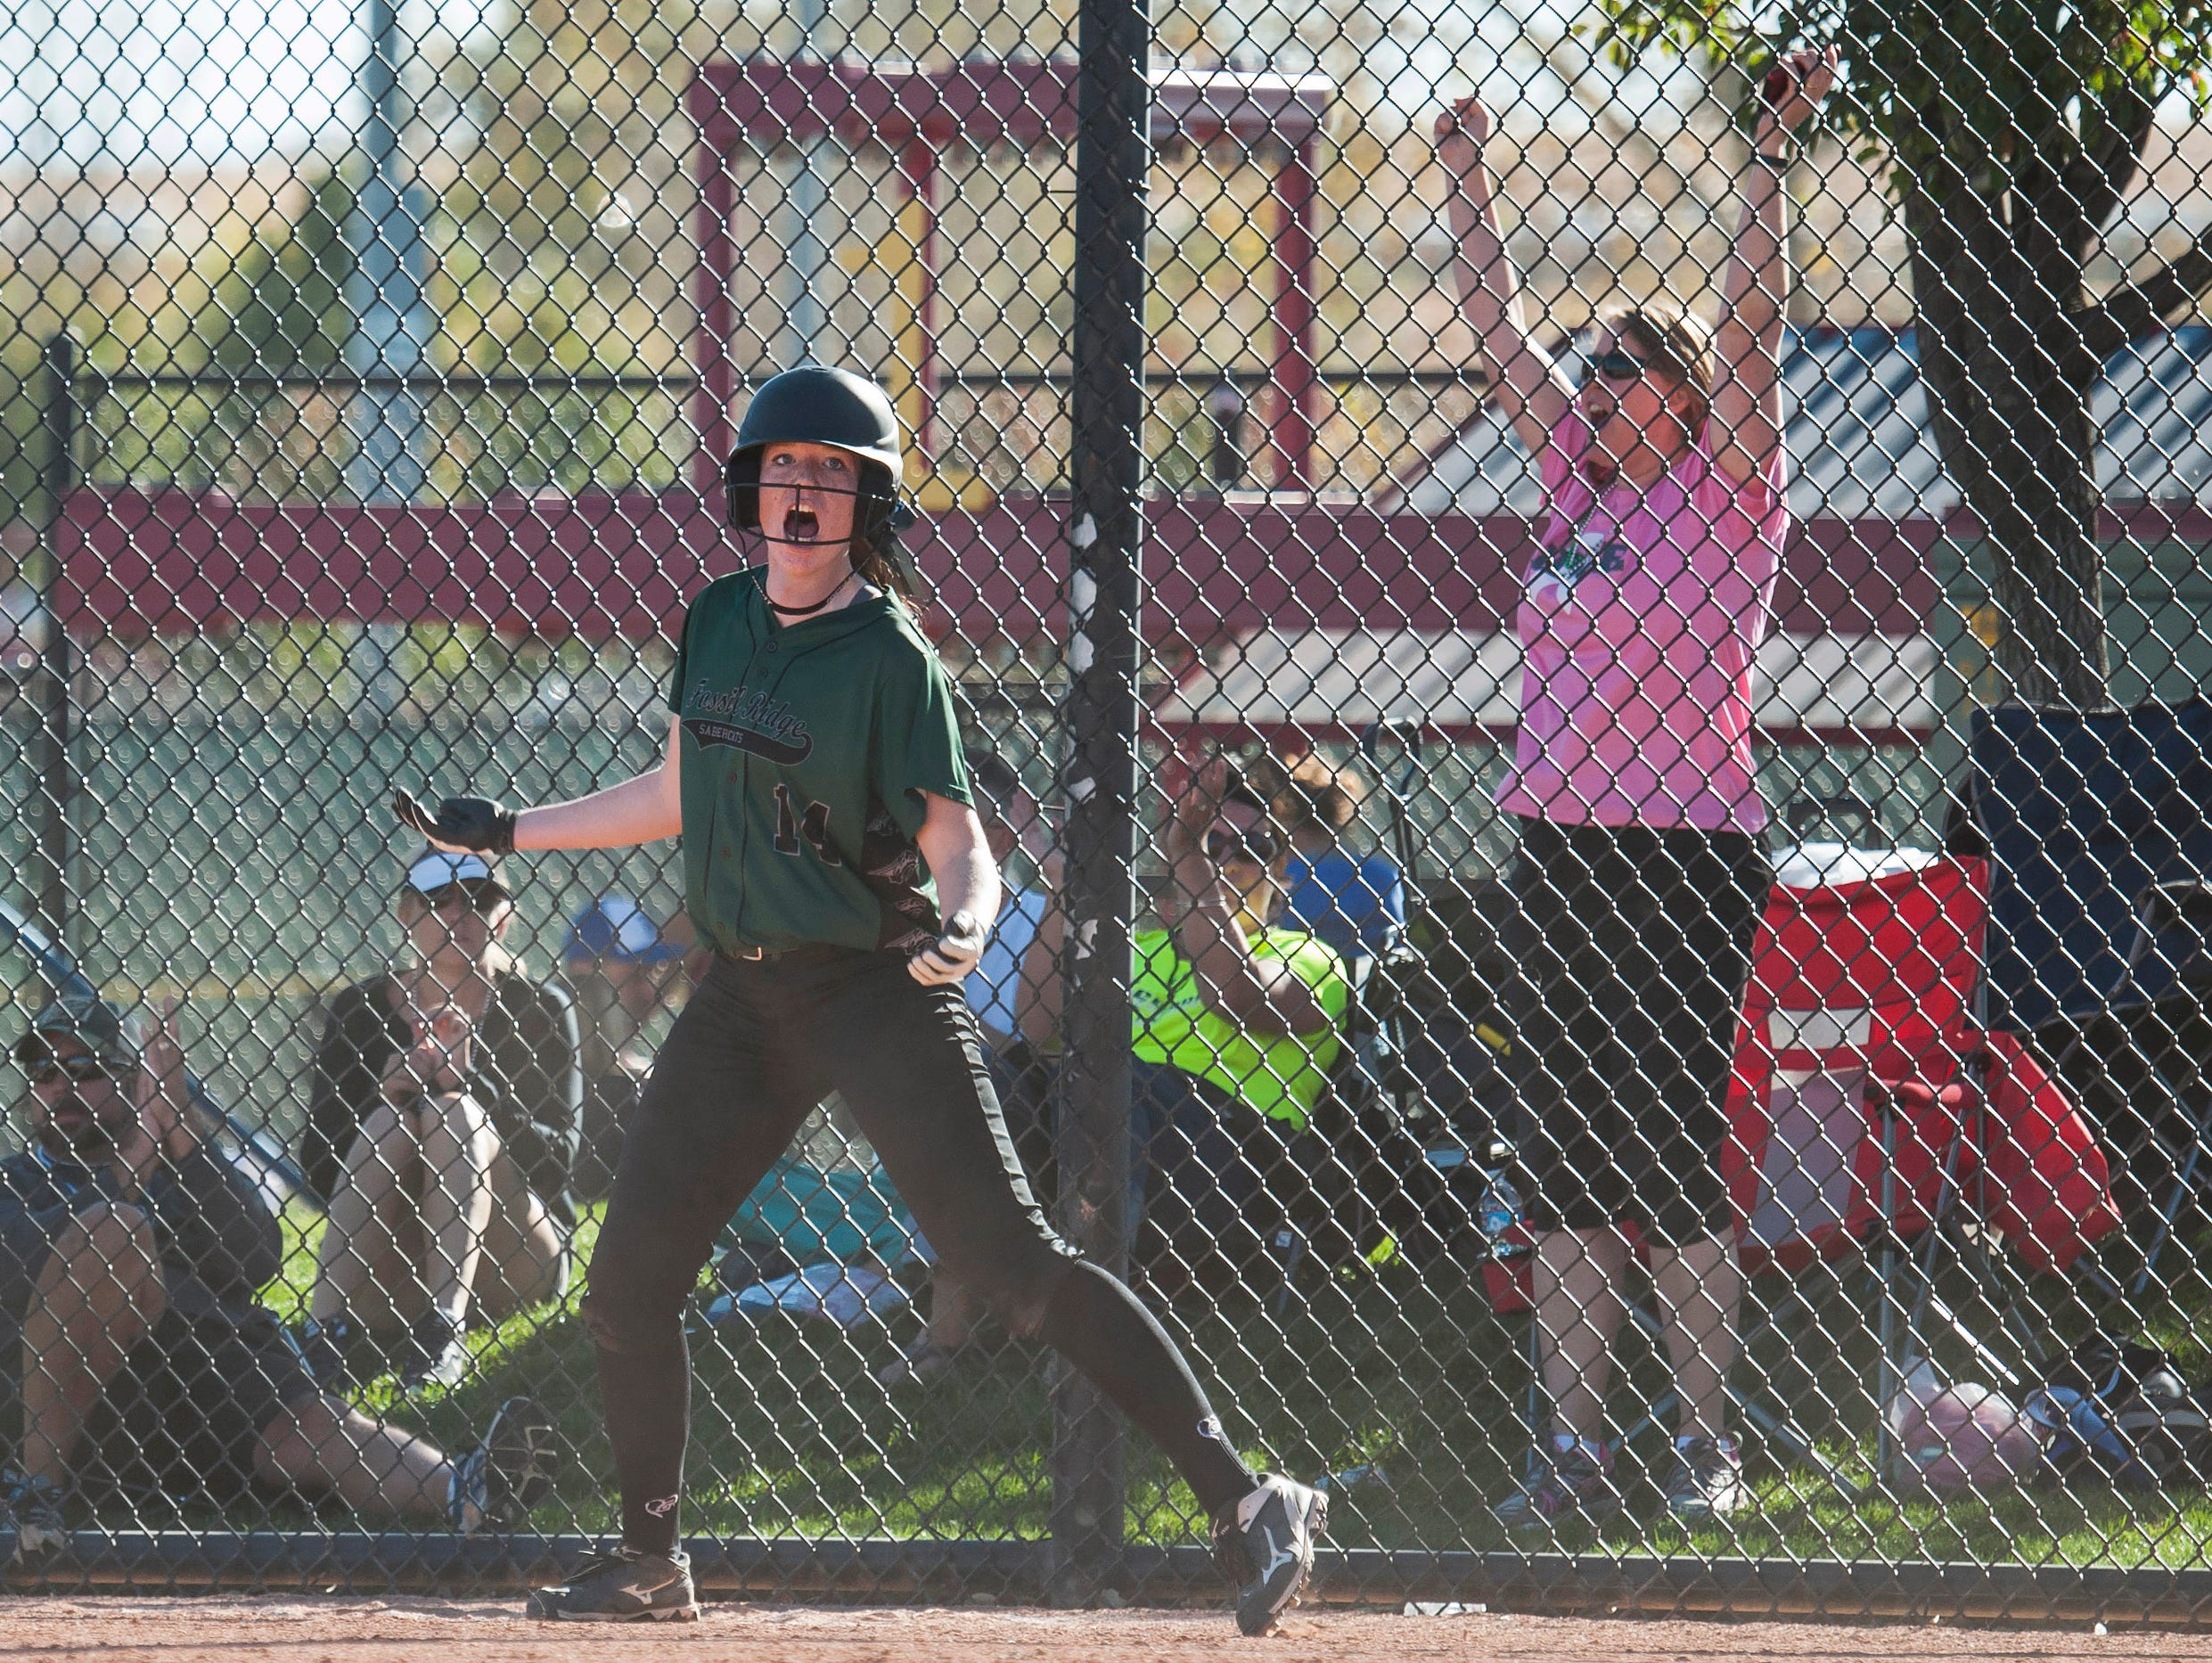 Fossil Ridge High School sophomore Kristen Reed (14) celebrates scoring a run in the game against Loveland High School in the quarterfinal round of the CHSAA 5A state softball championships Friday, Oct 21, 2016 at Aurora Sports Park. Fossil Ridge won 6-3.